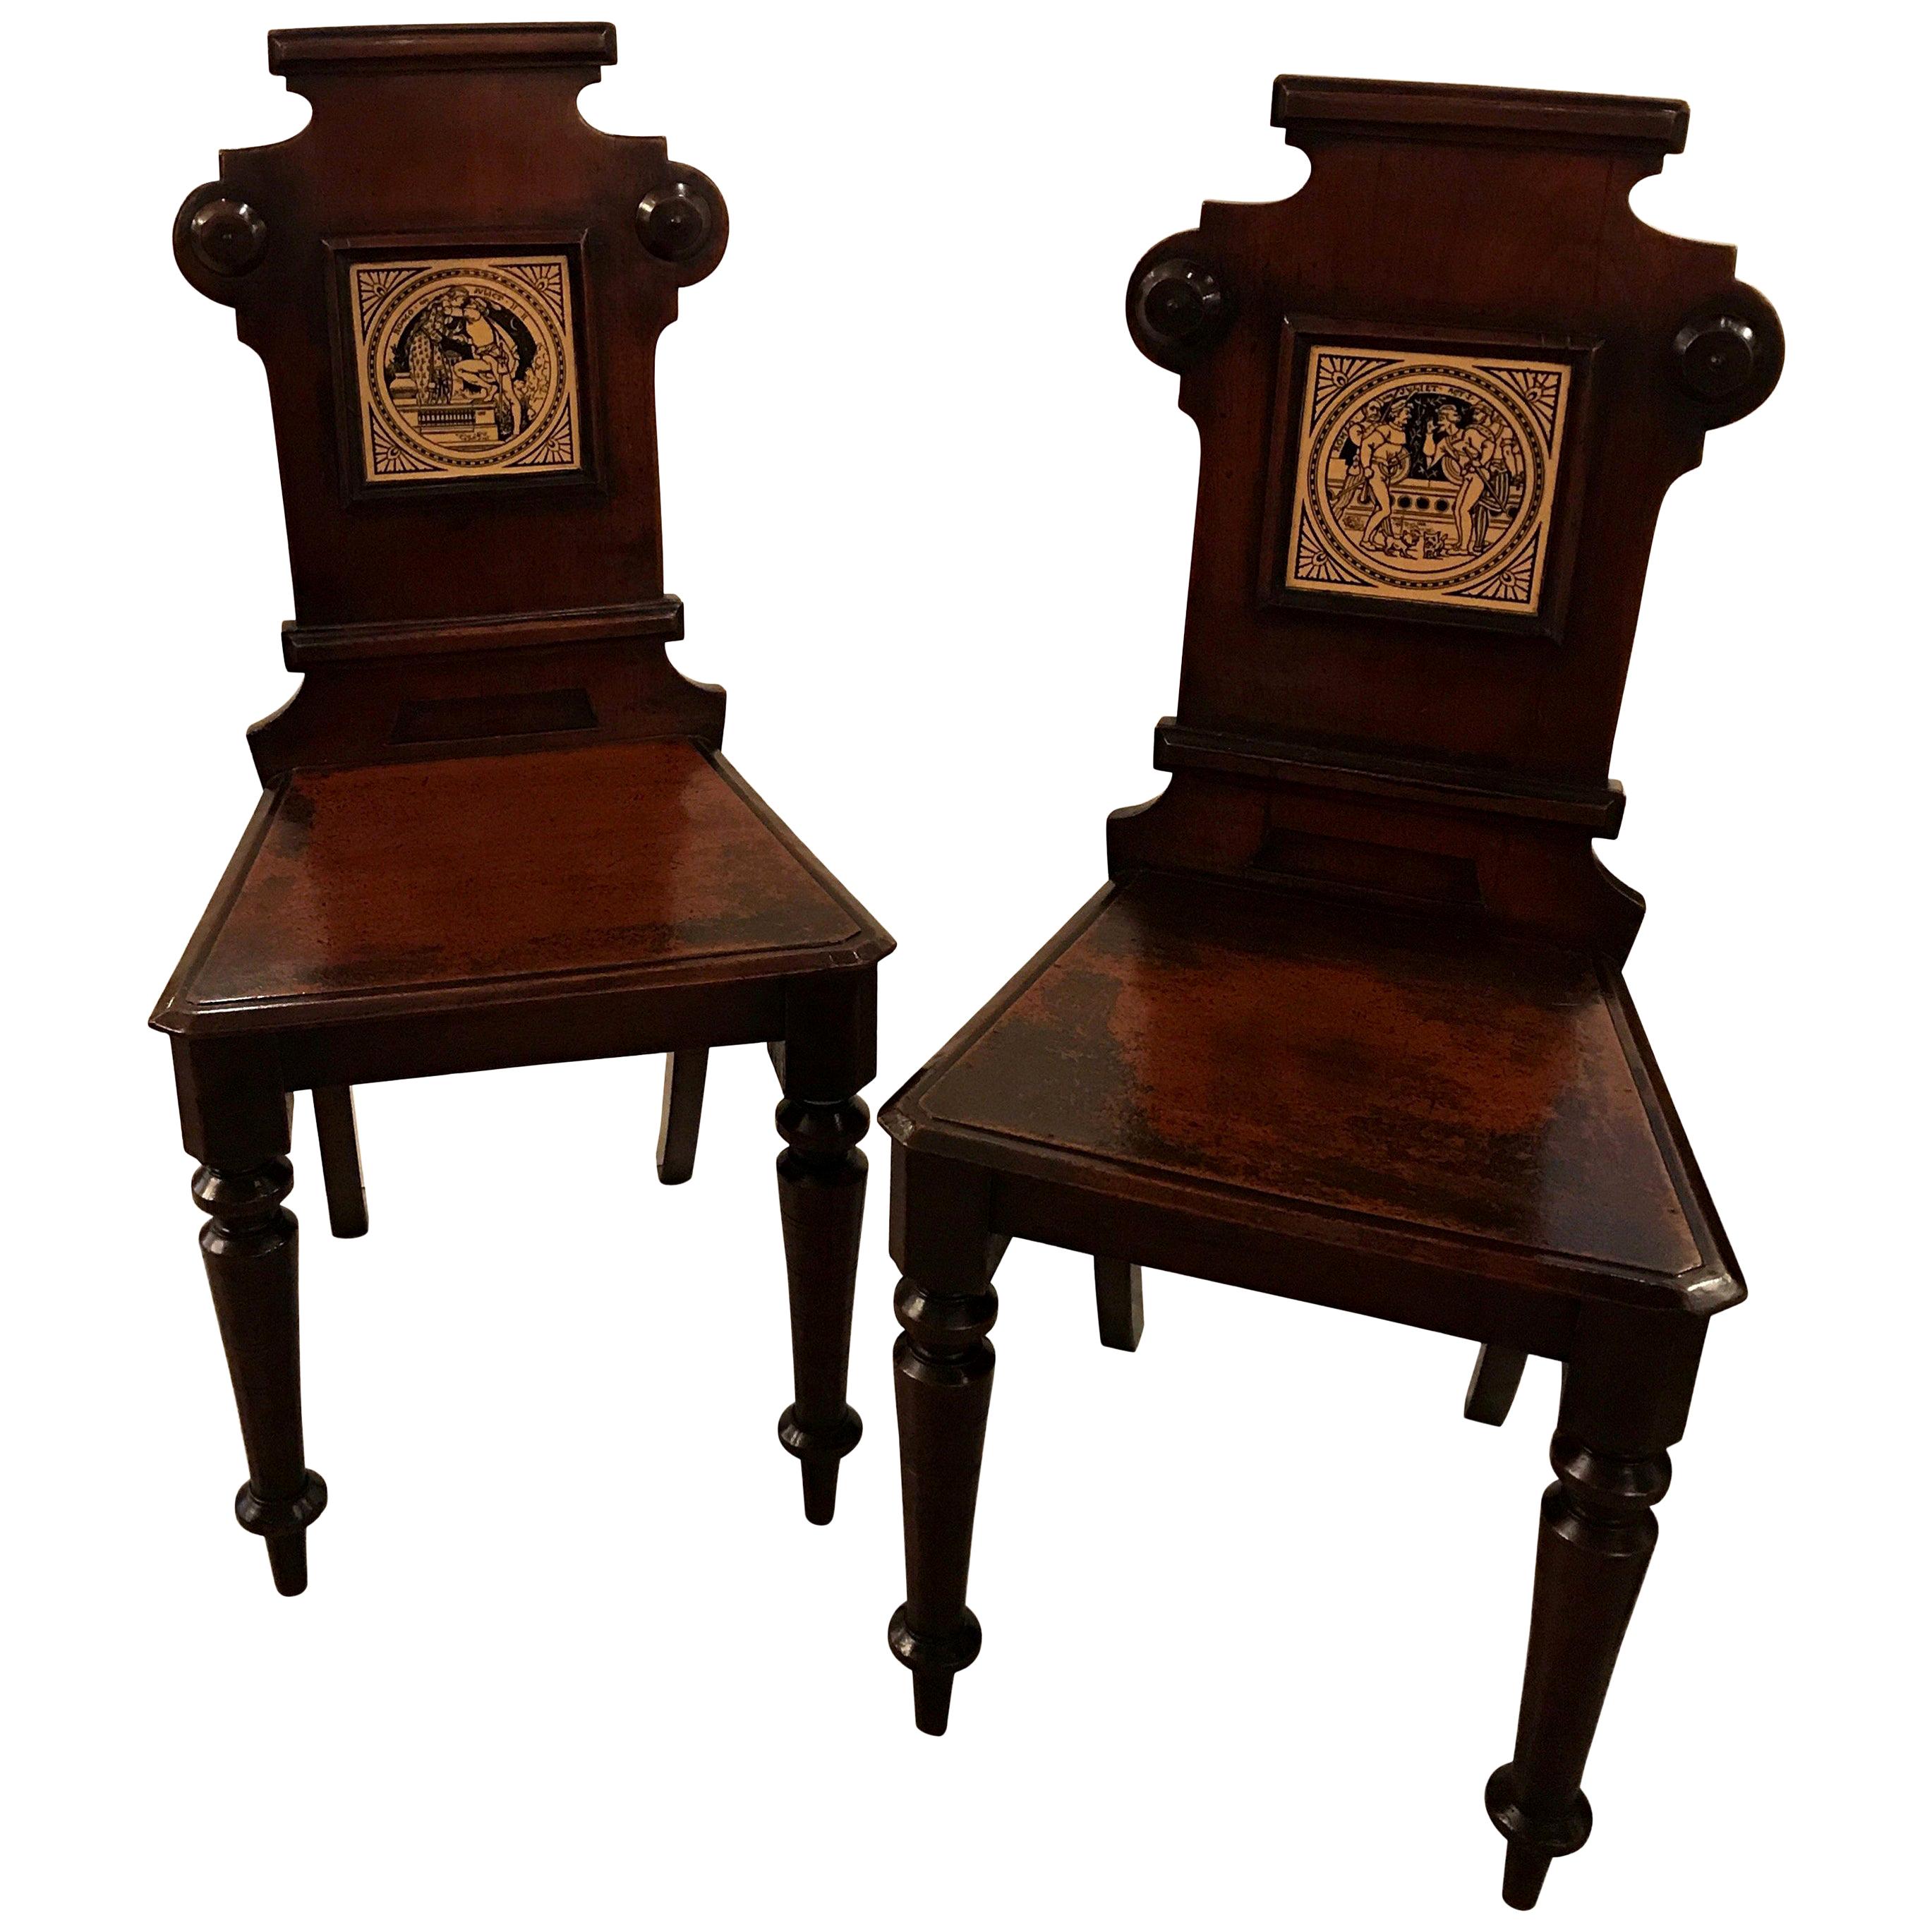 Pair of 19th Century English Hall Chairs with Minton Tiles For Sale